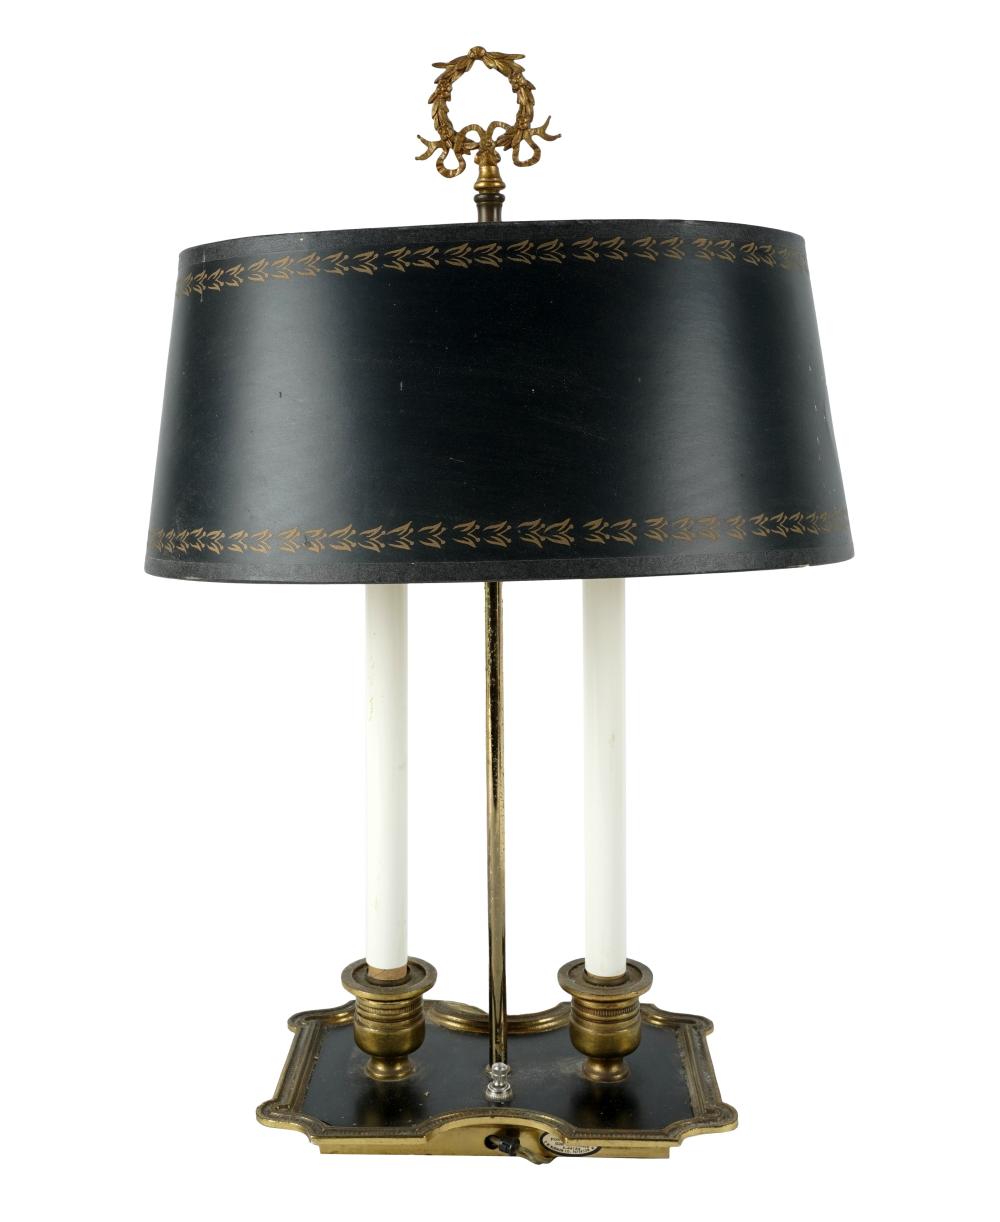 BOUILLOTTE LAMP20th century; with